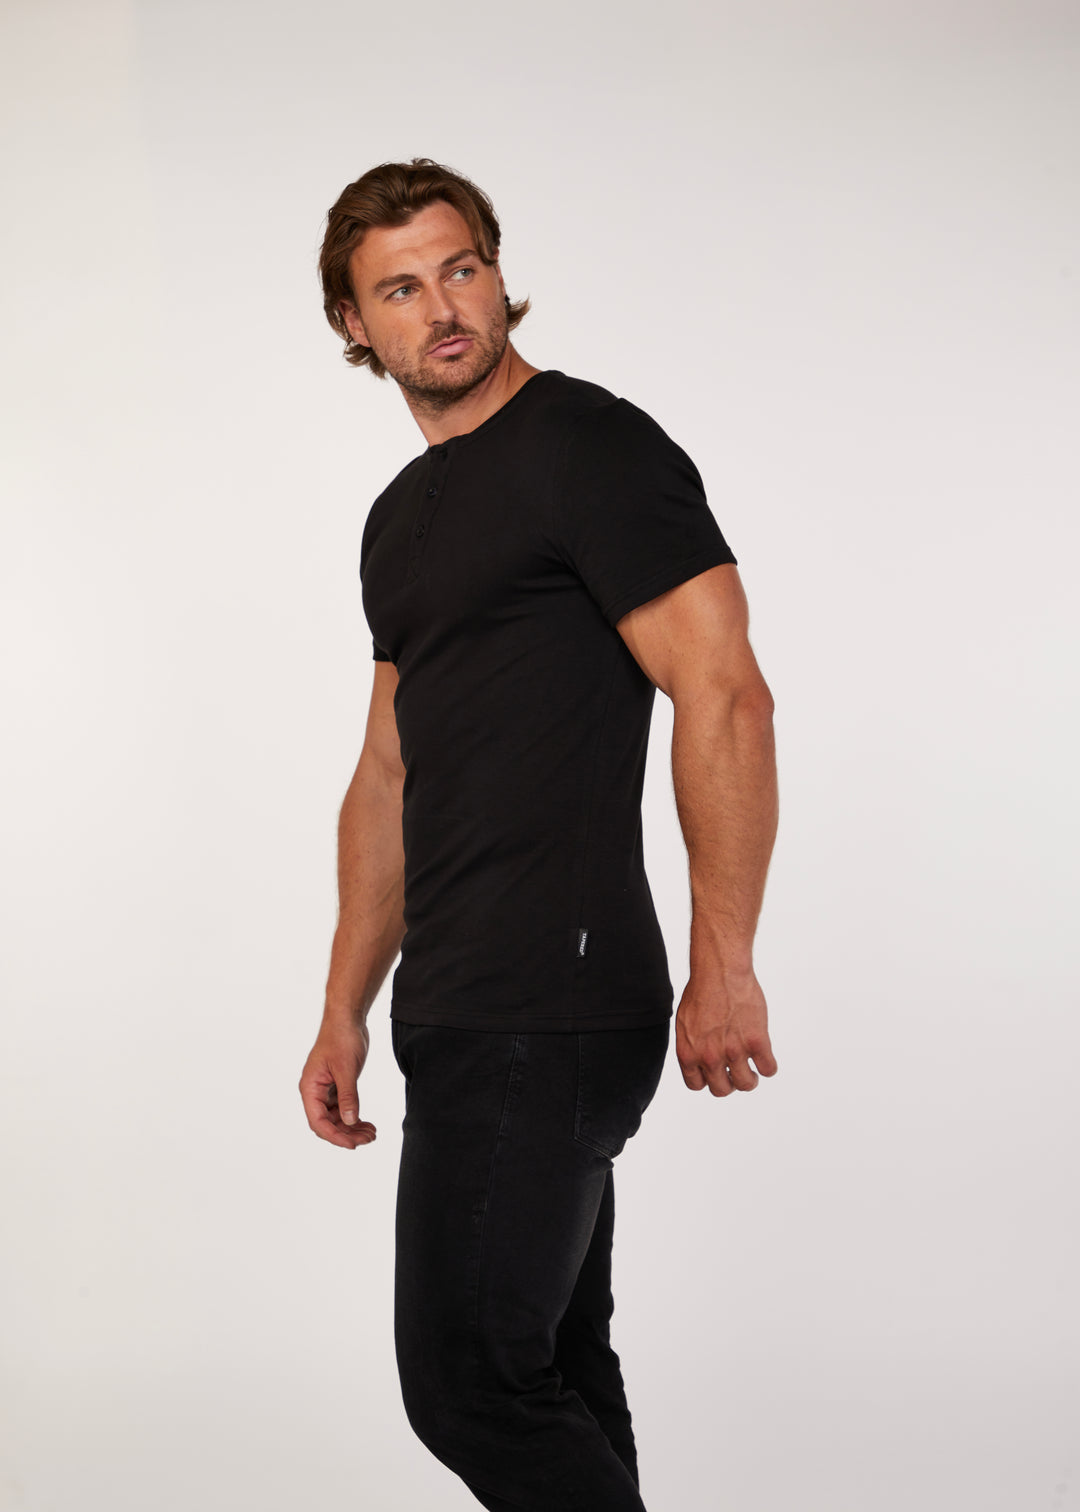 Mens Black Slim Fit Henley in Short Sleeve. A Proportionally Fitted and Slim Fit Henley. The best henley for slim guys.